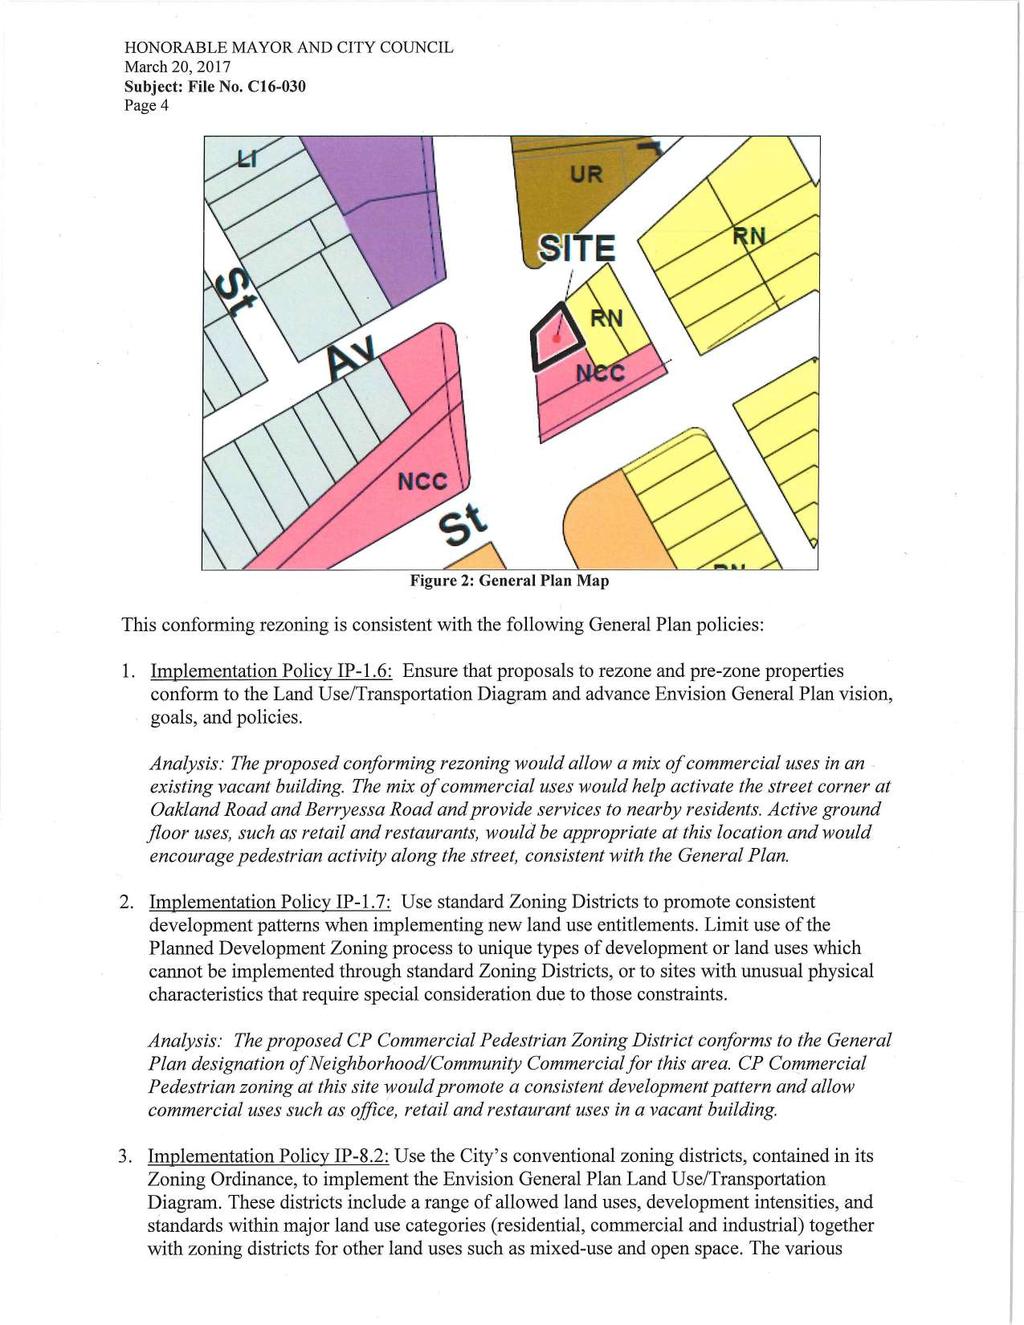 Subject: File No. C16-030 Page 4 This conforming rezoning is consistent with the following General Plan policies: 1. Implementation Policy IP-1.